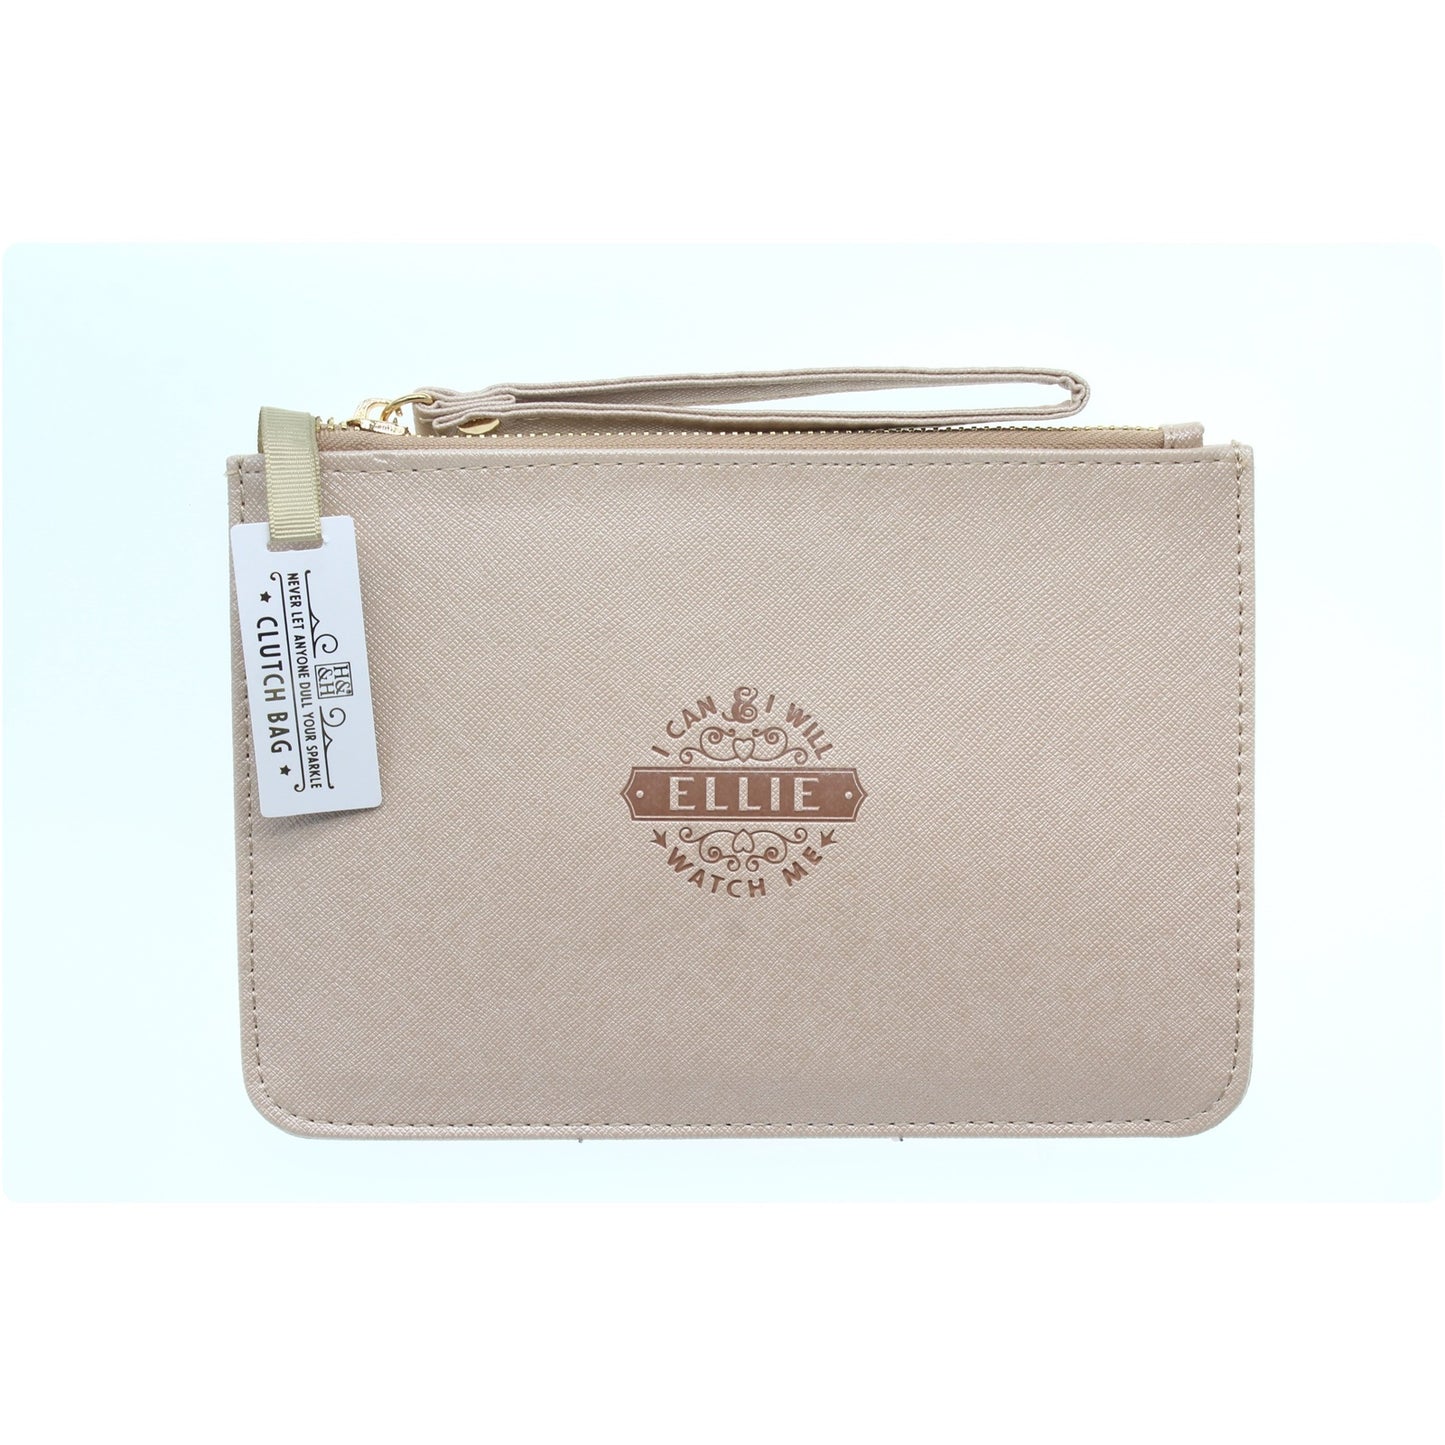 Clutch Bag With Handle & Embossed Text "Ellie"